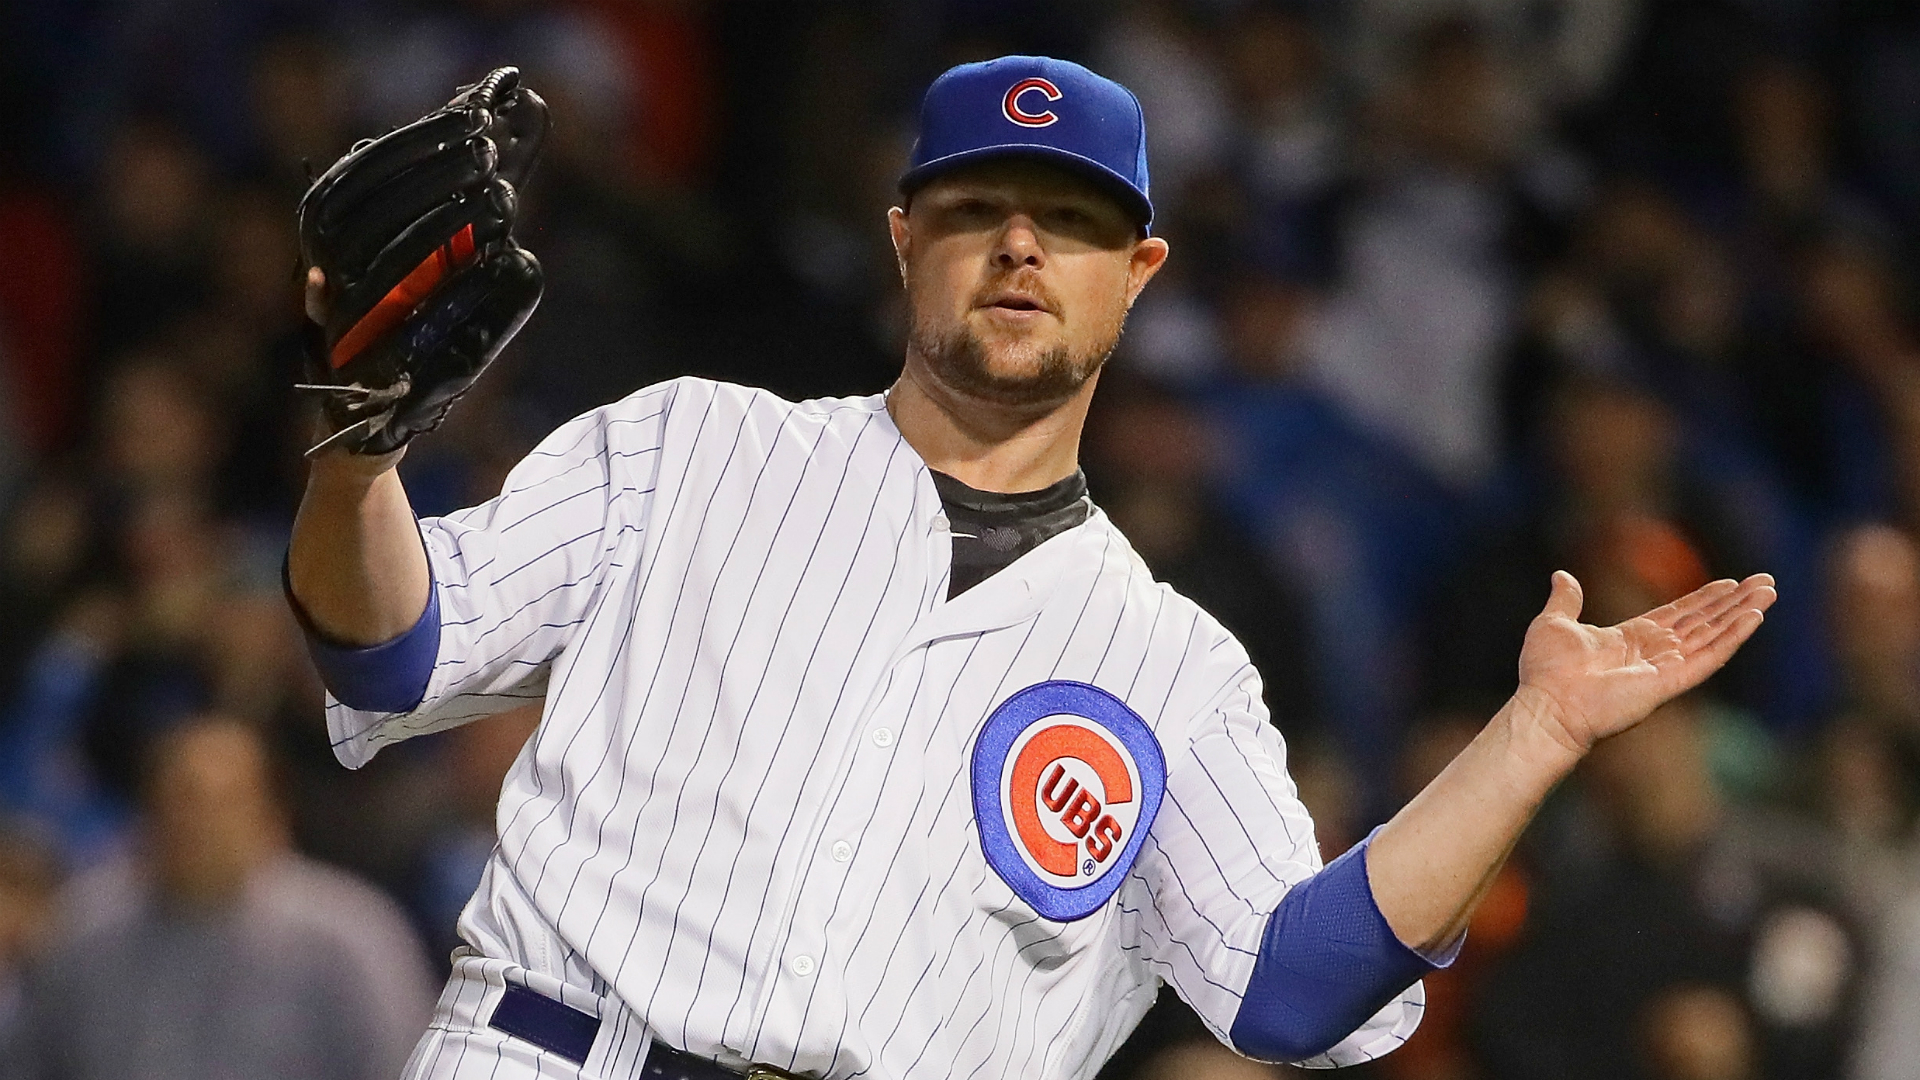 The left-handed Cubs pitcher said he's using a unique technique to improve his throwing to bases.